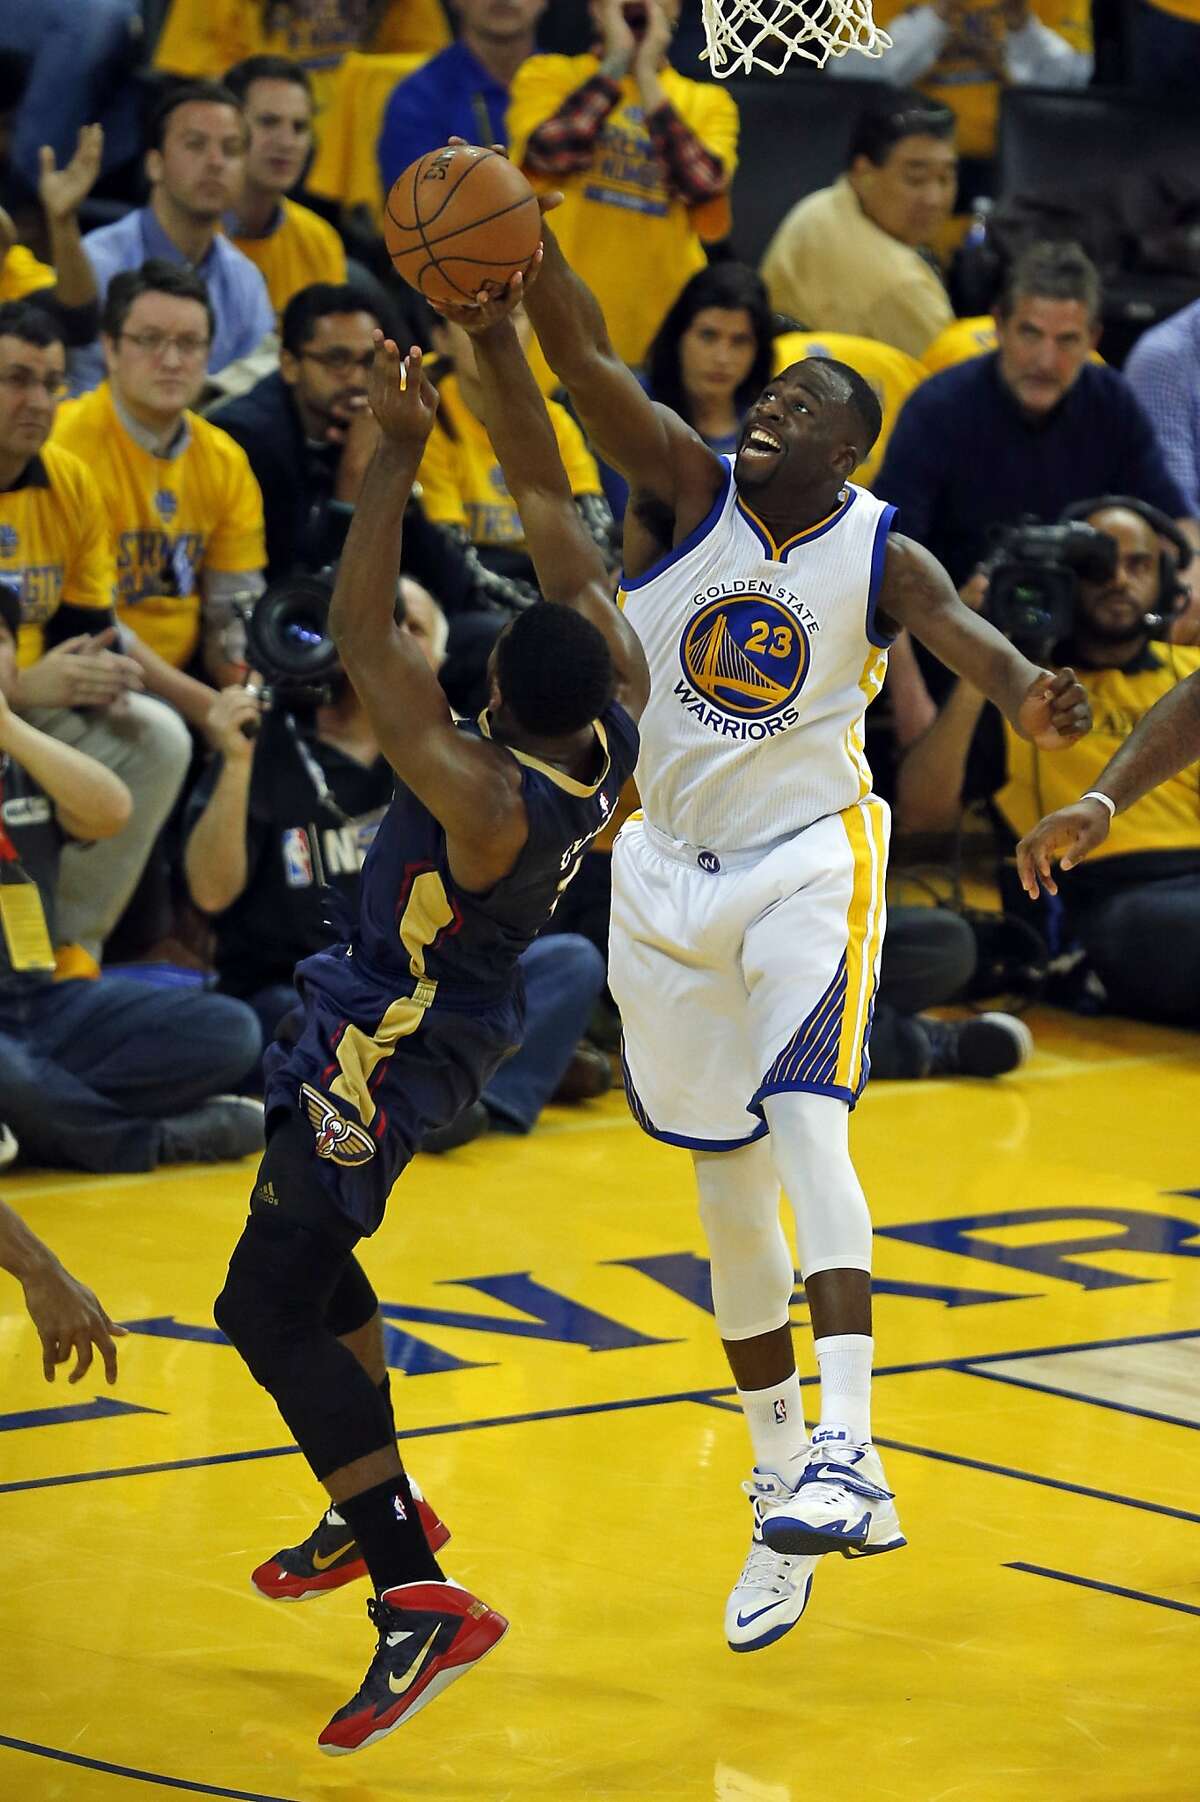 Golden State Warriors' Draymond Green blocks a shot by New Orleans Pelicans' Tyreke Evans in 2nd quarter during Game 2 of the 1st Round of NBA Western Conference Playoffs at Oracle Arena in Oakland, Calif., on Monday, April 20, 2015.